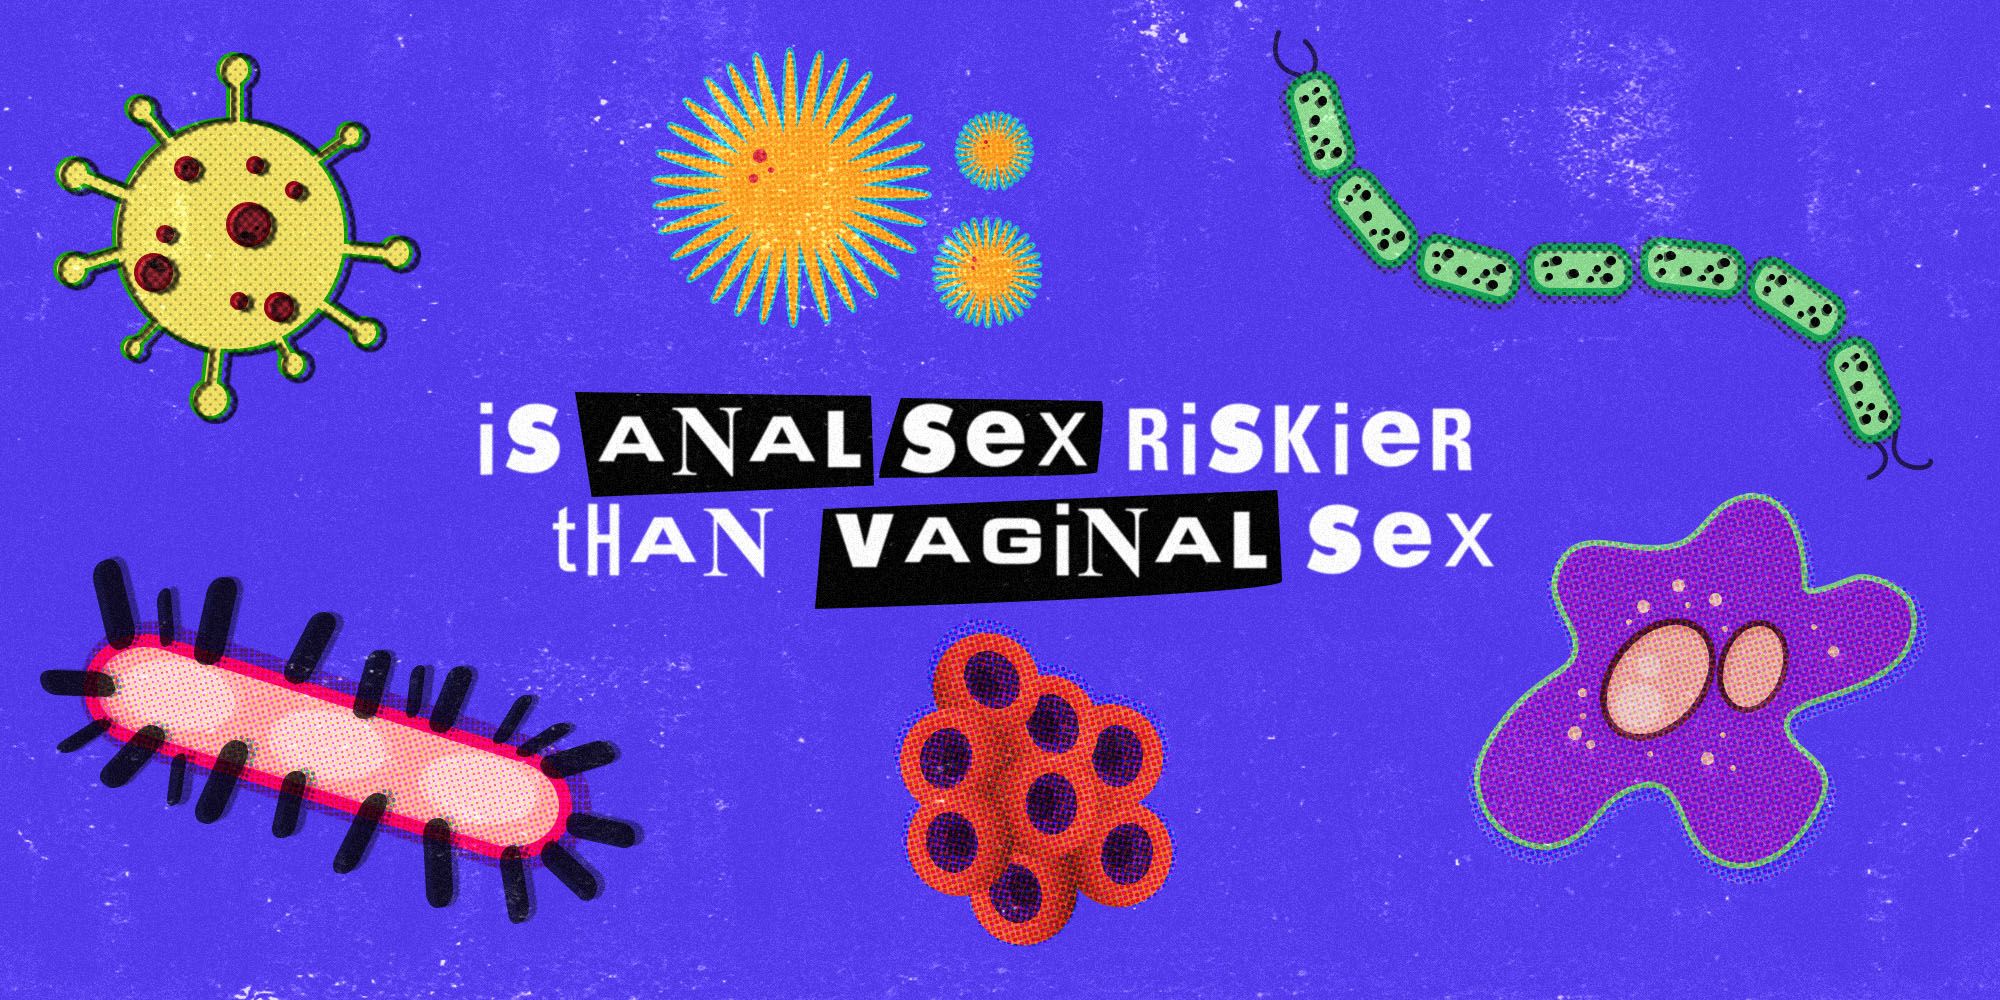 Can you get diseases from anal sex